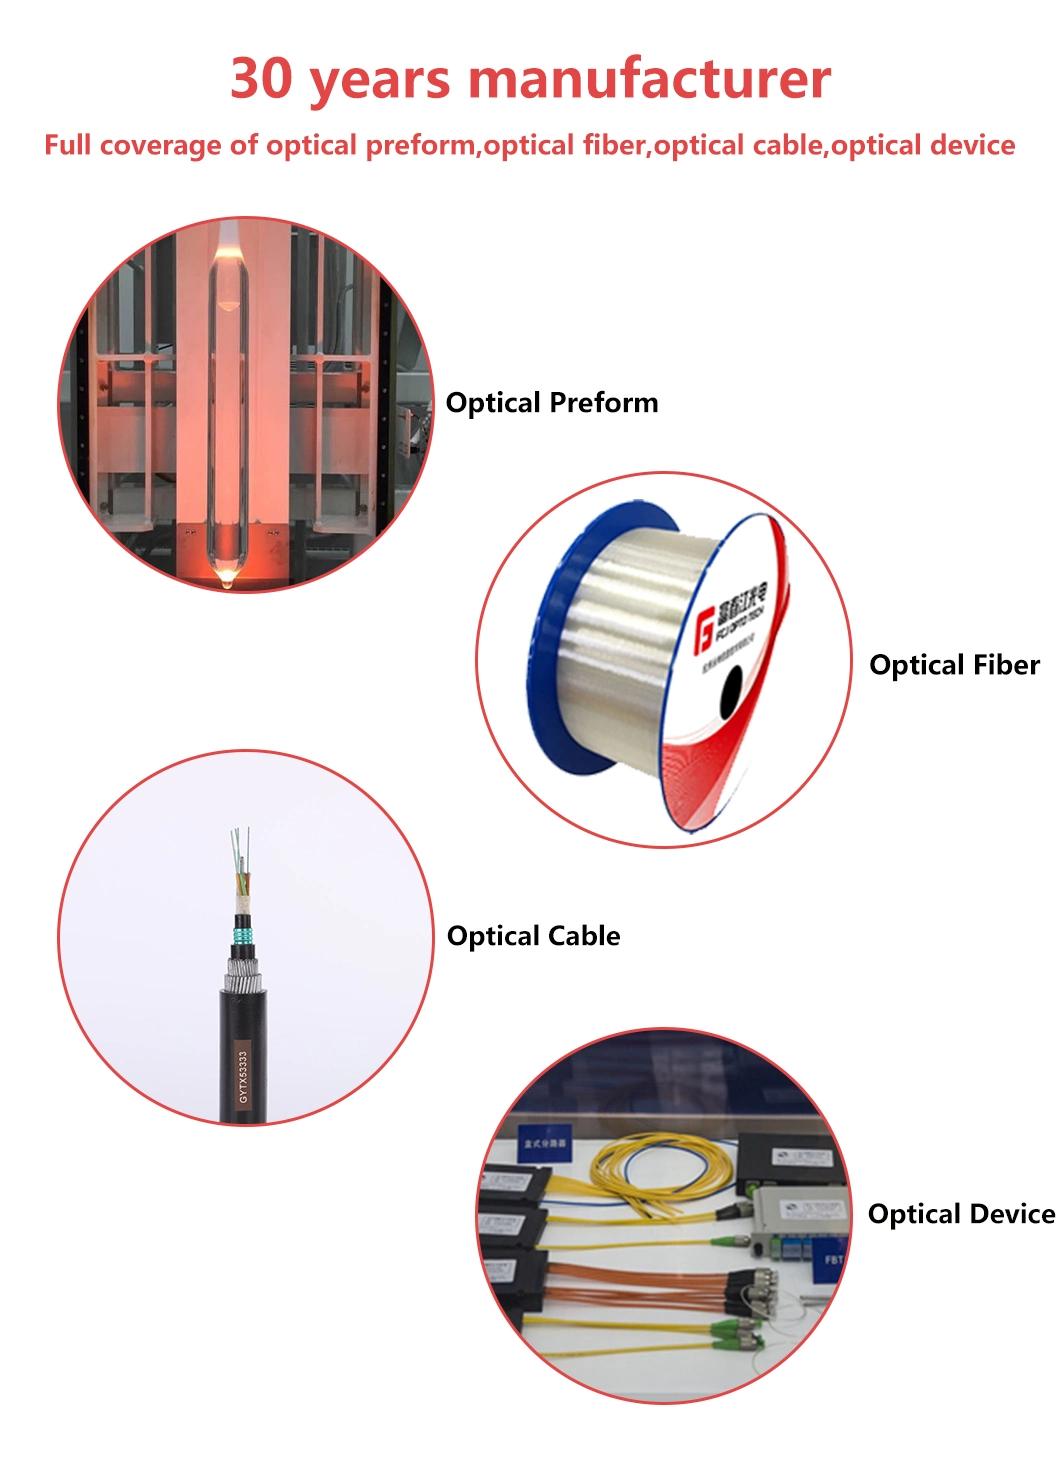 Small-Size Optical Fiber Cable and Device L-Band Fiber Optic Factory G657A1